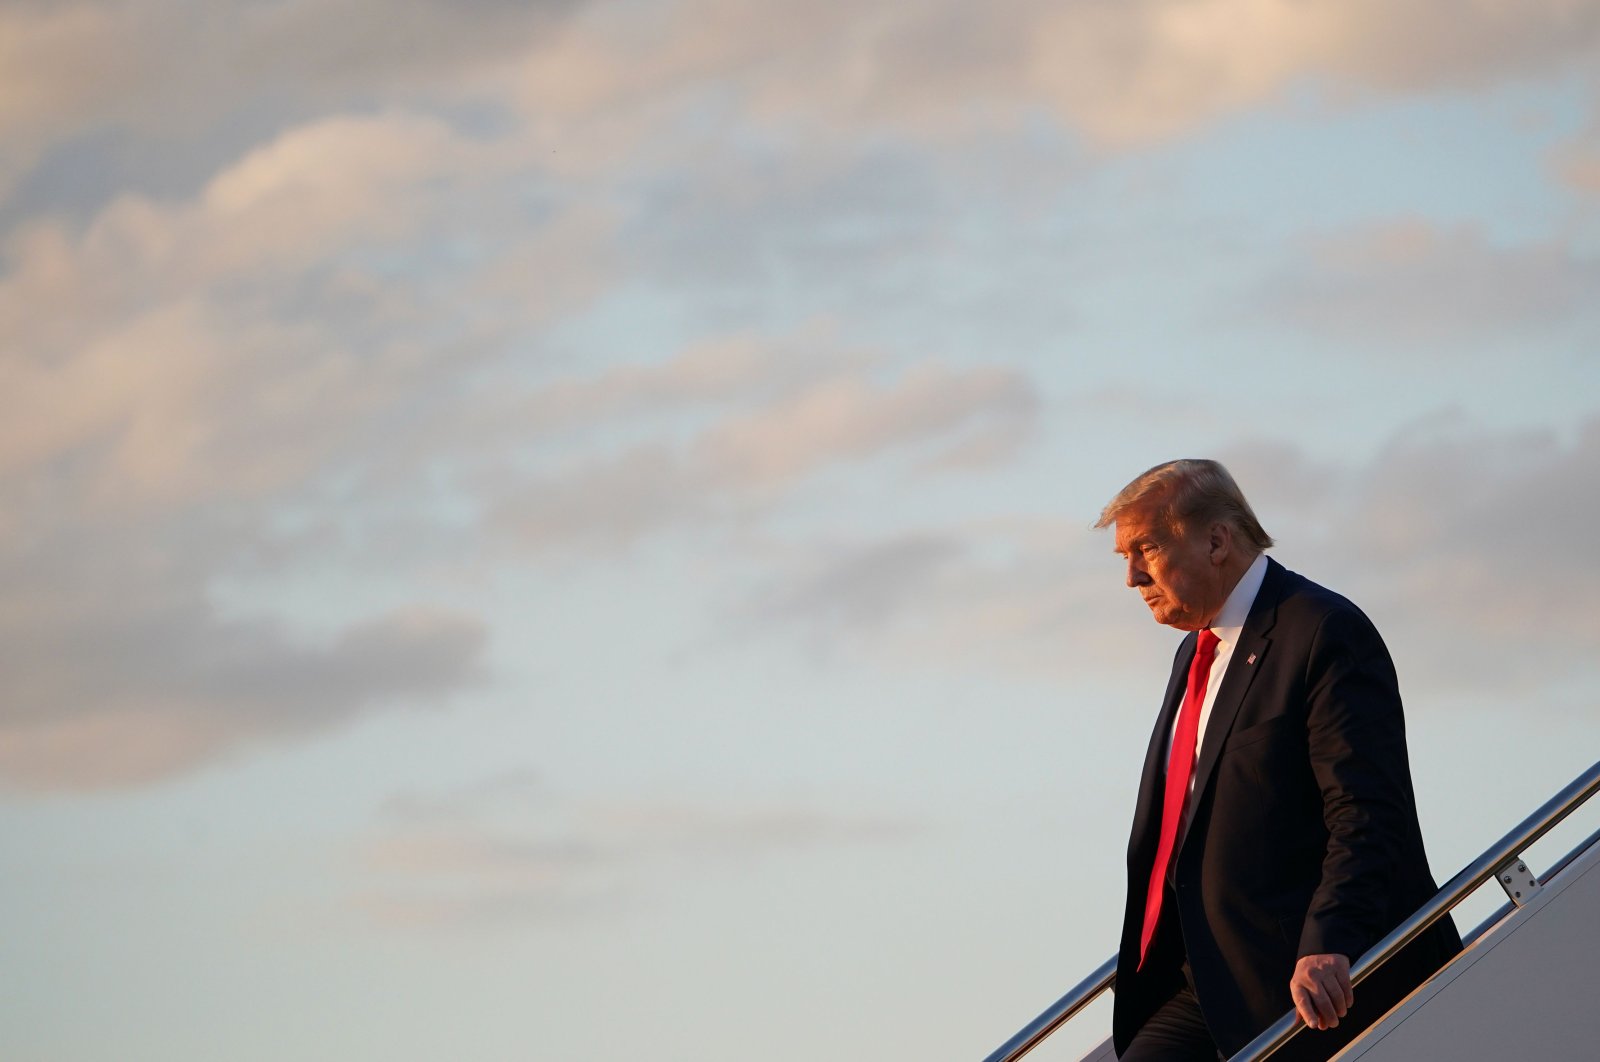 US President Donald Trump steps off Air Force One upon return to Andrews Air Force Base in Maryland on May 30, 2020. (AFP Photo)